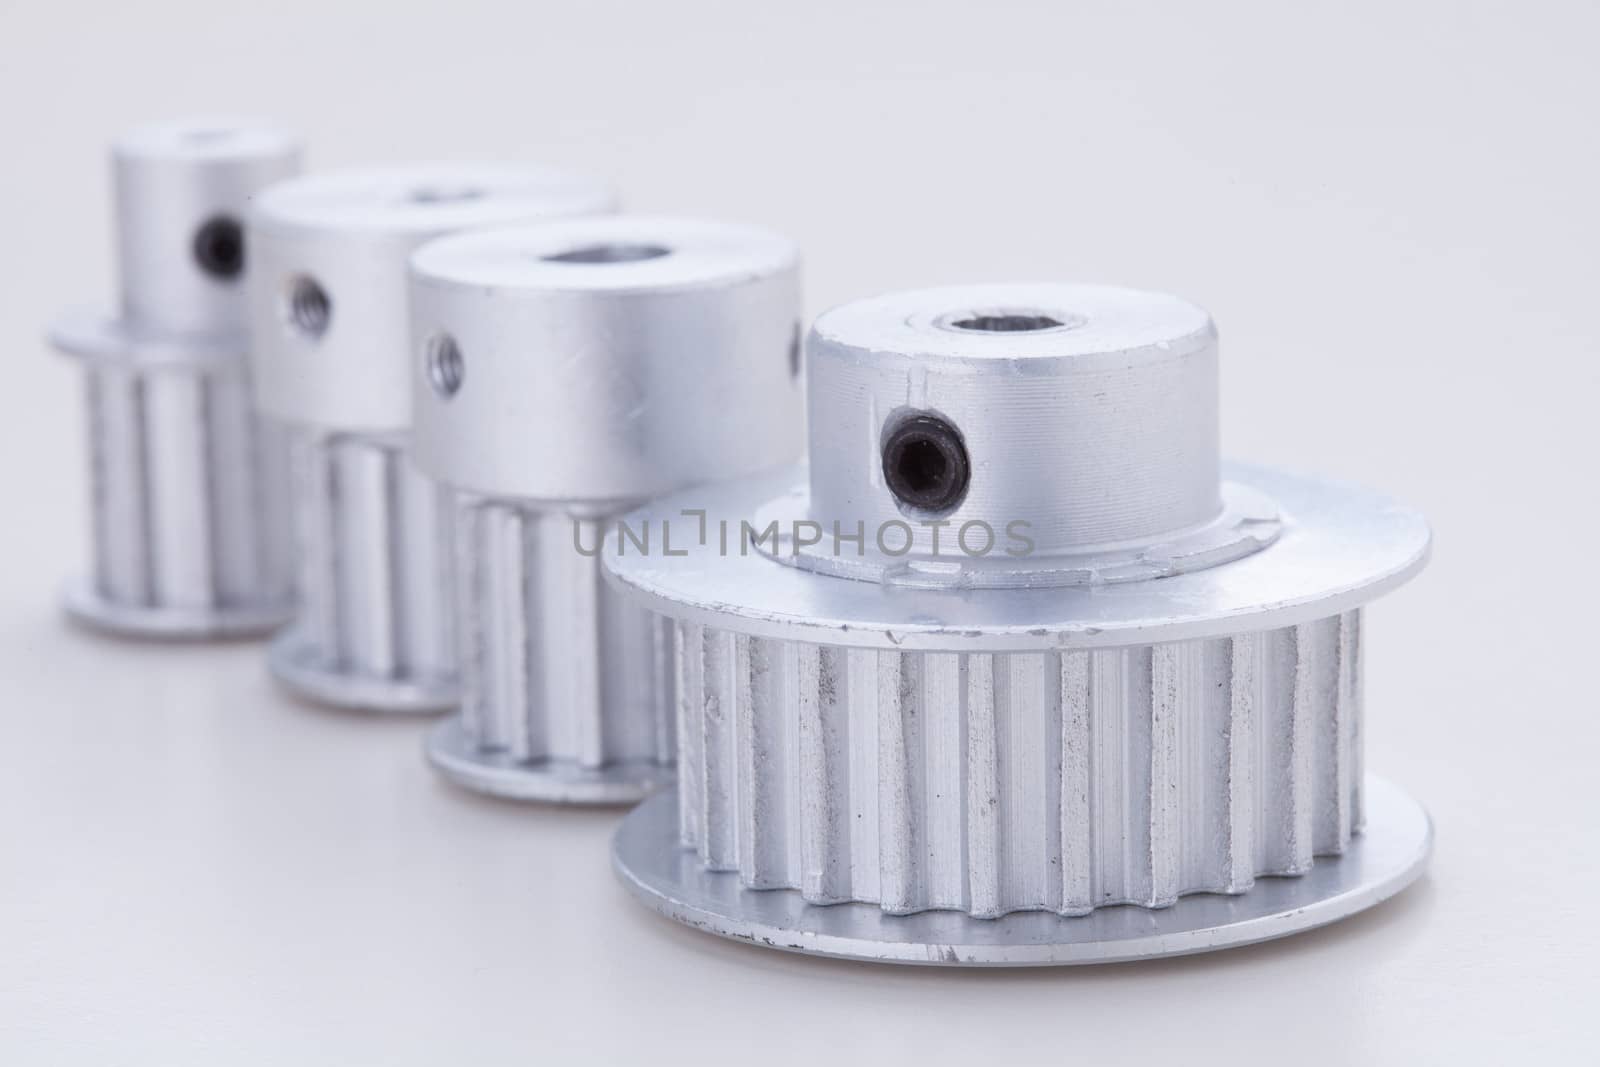 timing pulleys on white background